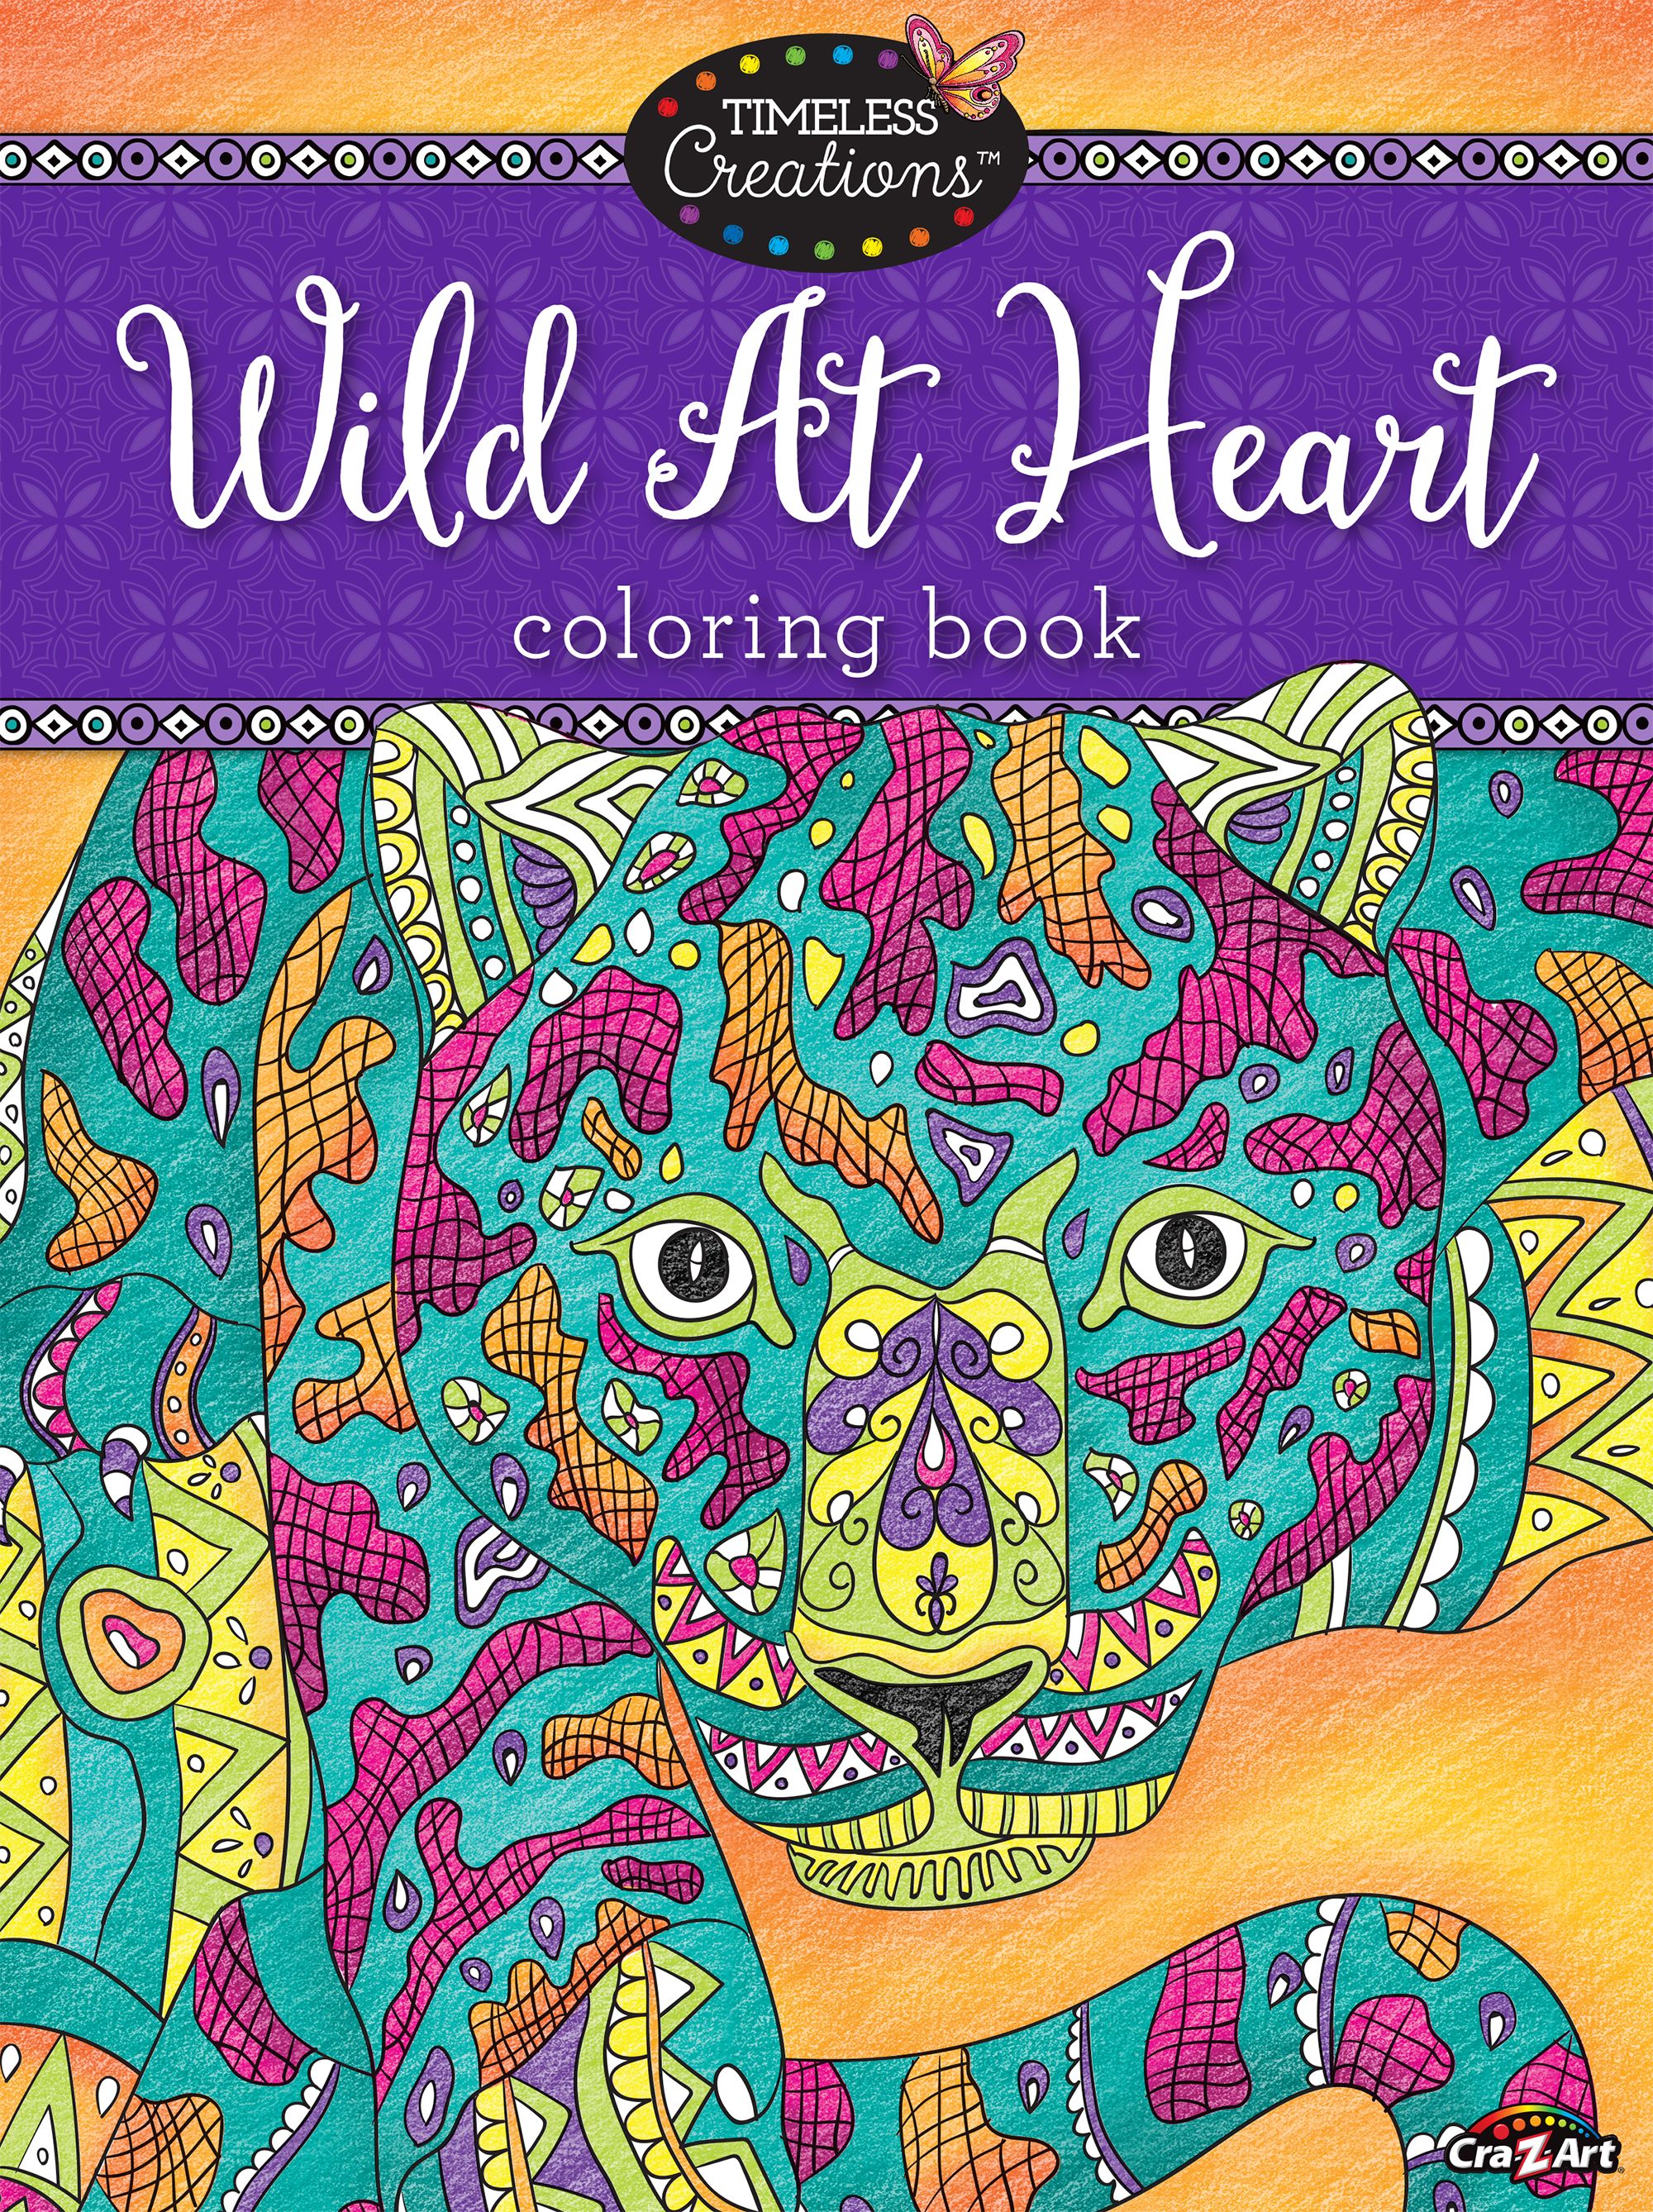 Cra-Z-Art Timeless Creations Adult Coloring Book, Wild at Heart, 64 Pages - image 1 of 10